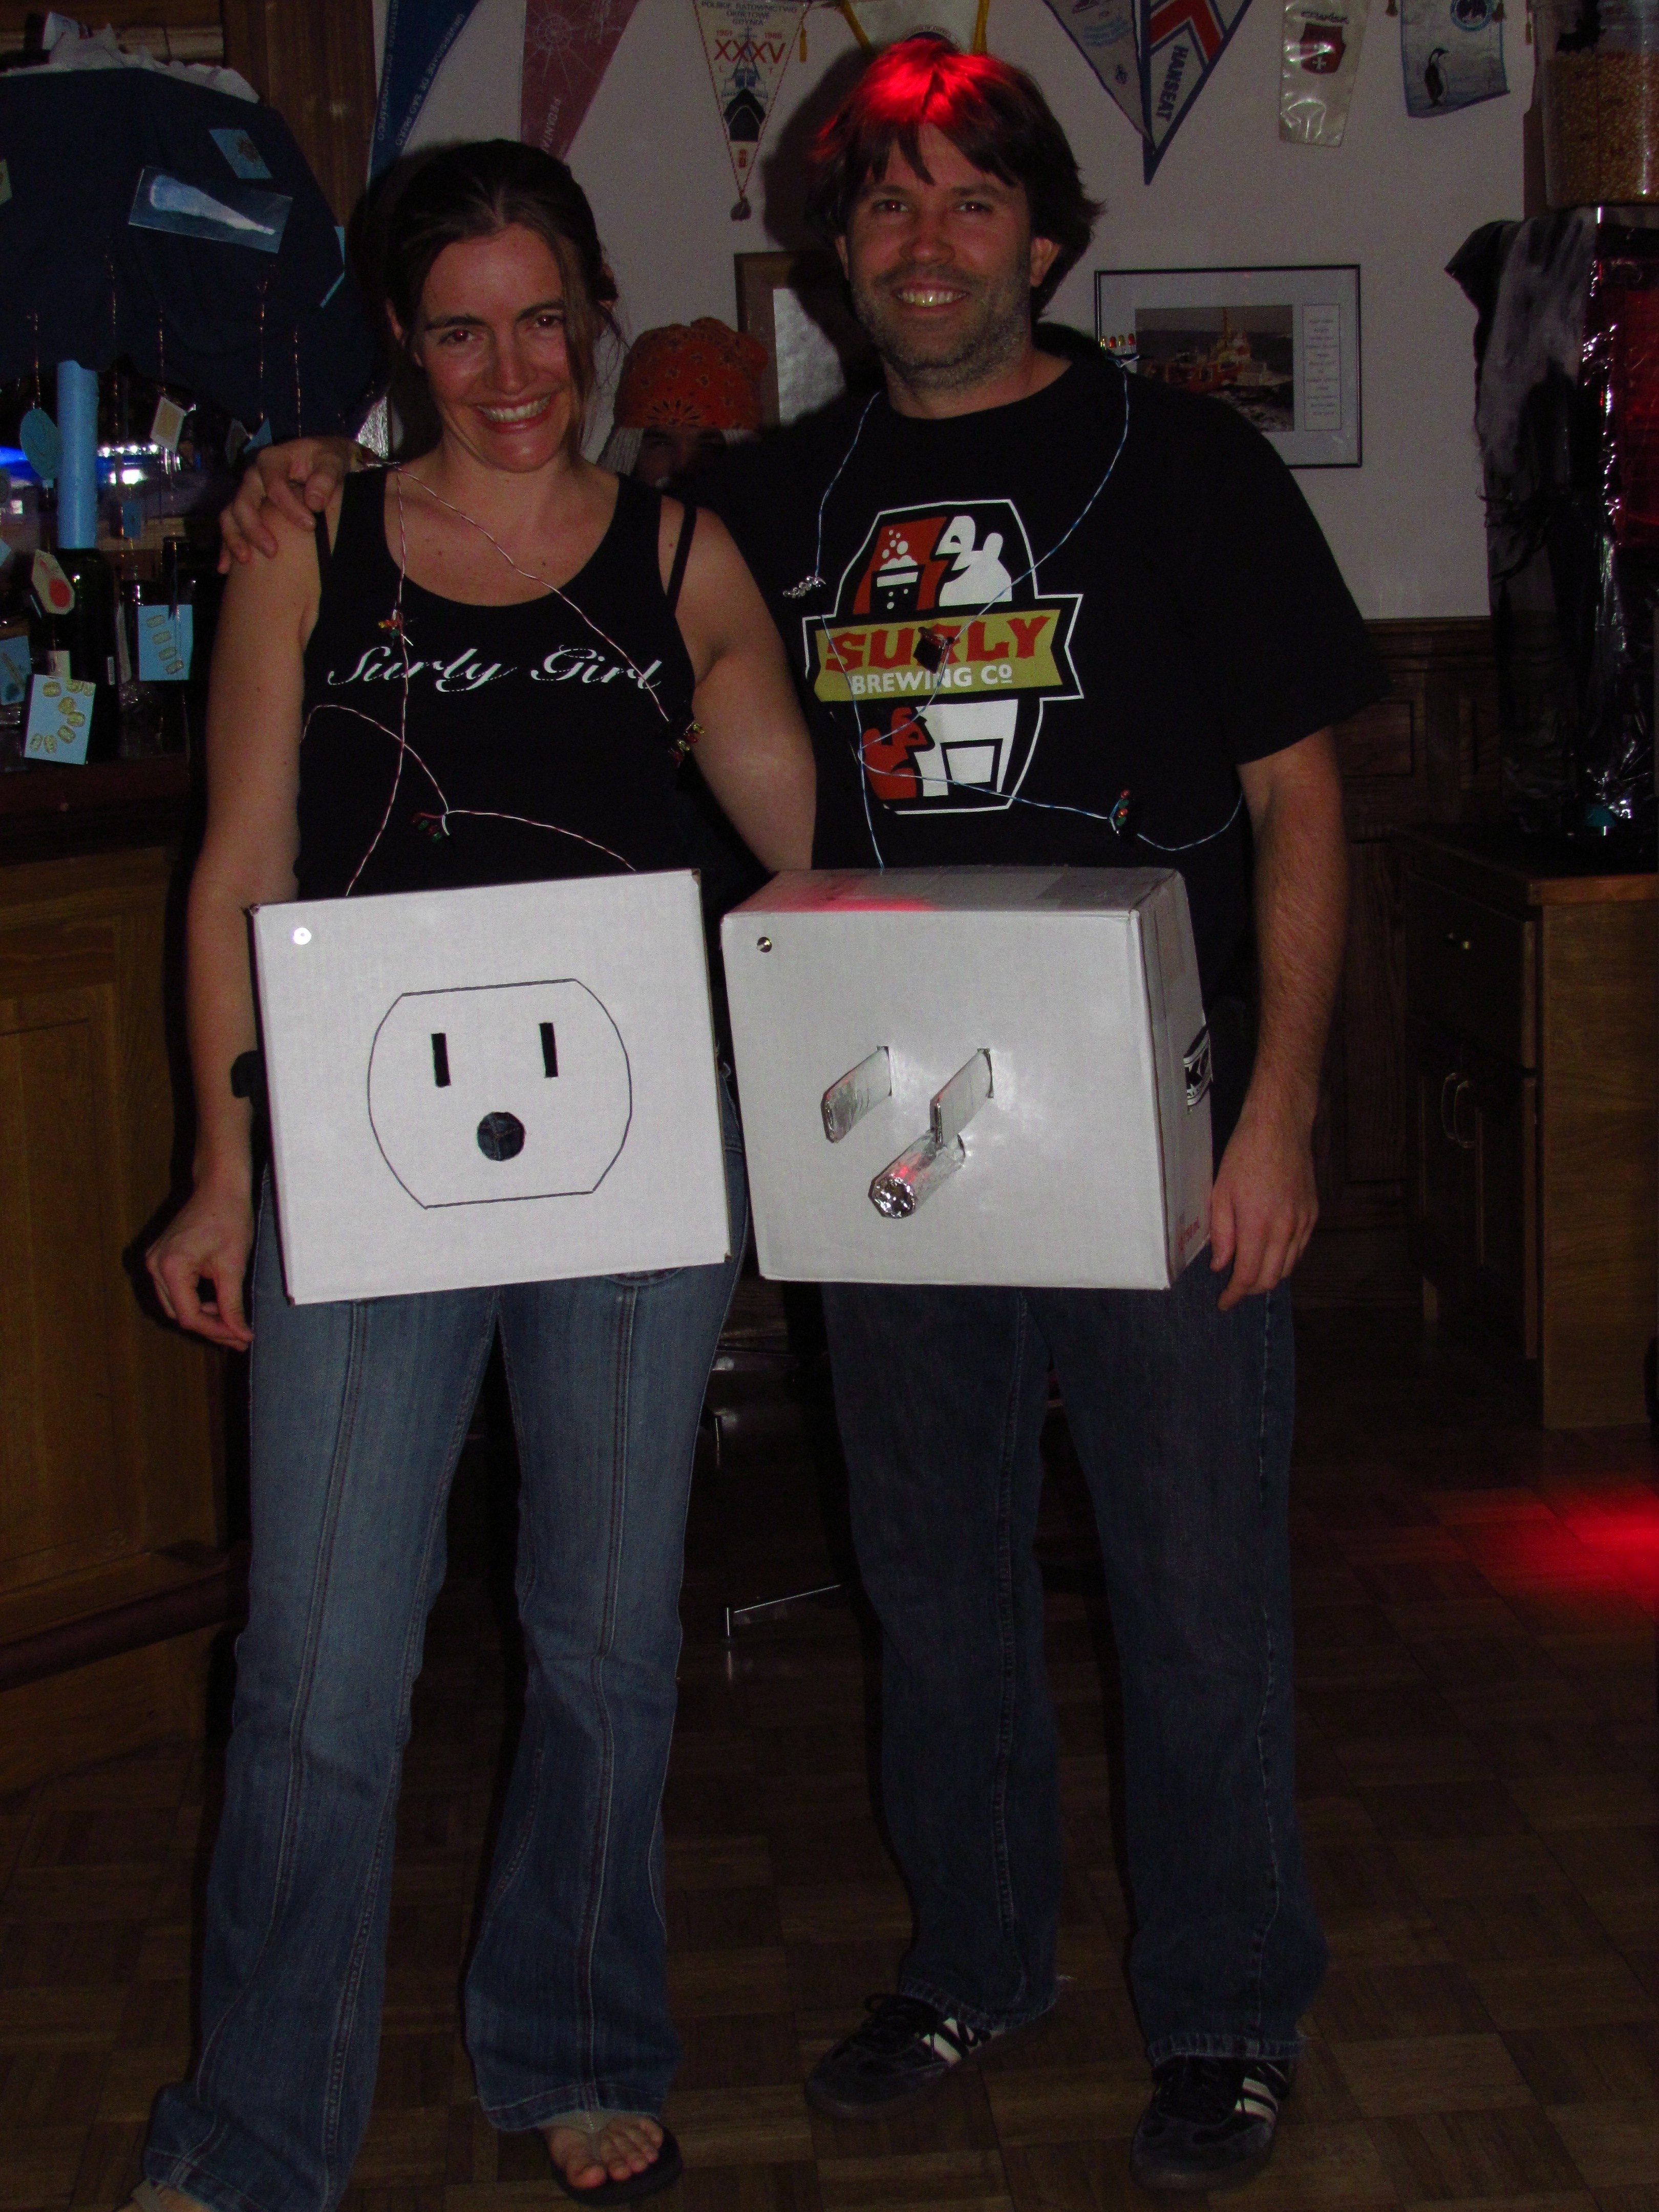 32 Diy Ideas For Couples Halloween Costumes 11 